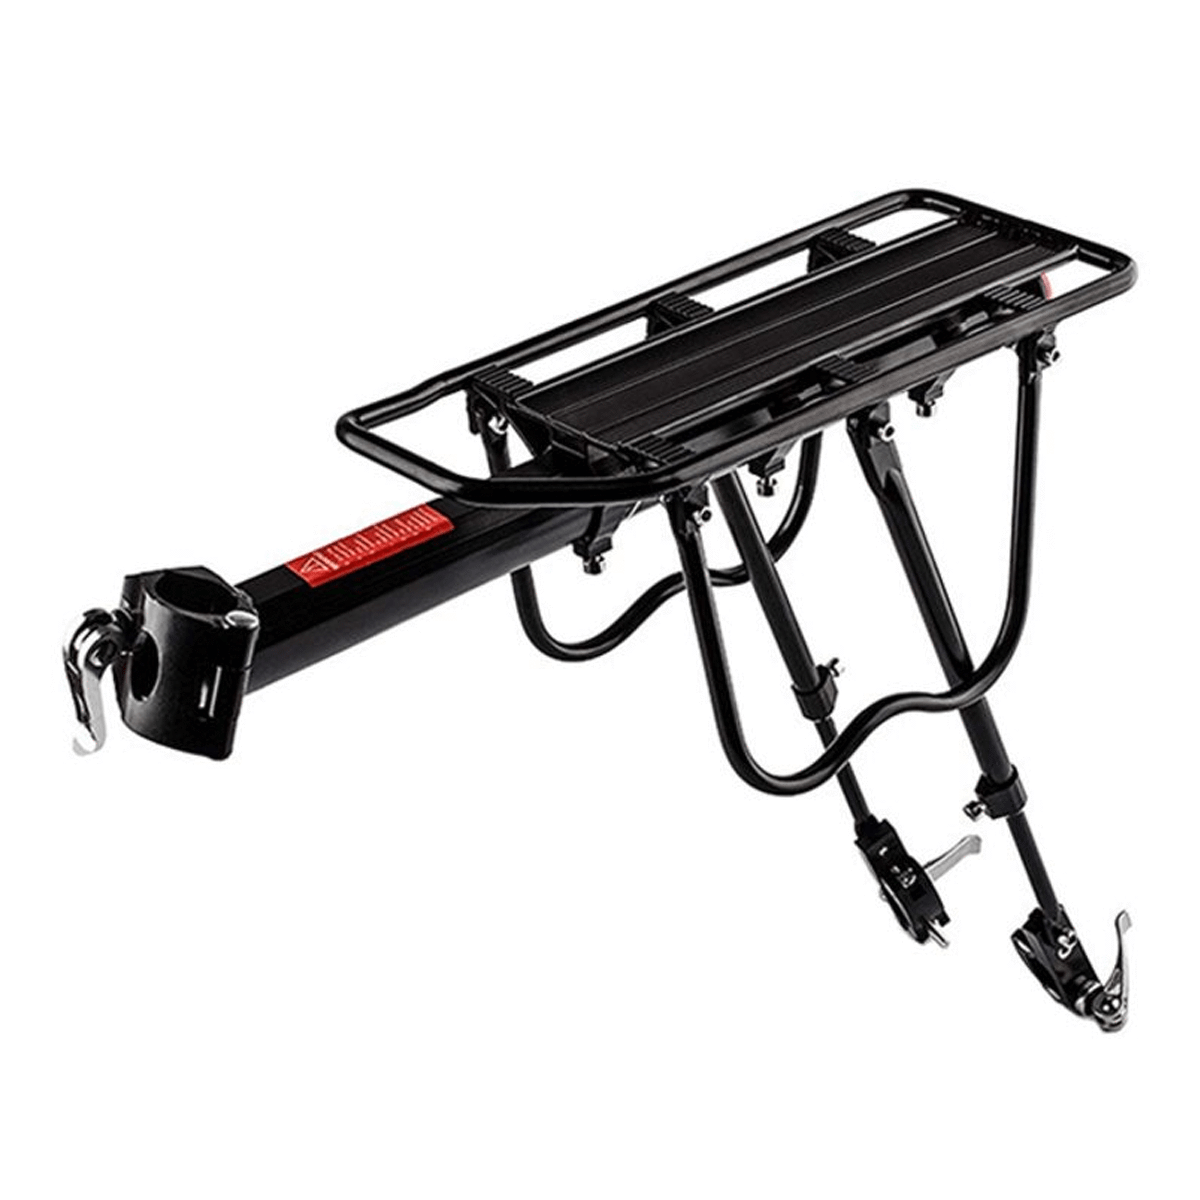 Bicycle Accessories Cargo Rack For Mountain Bike - VLRA